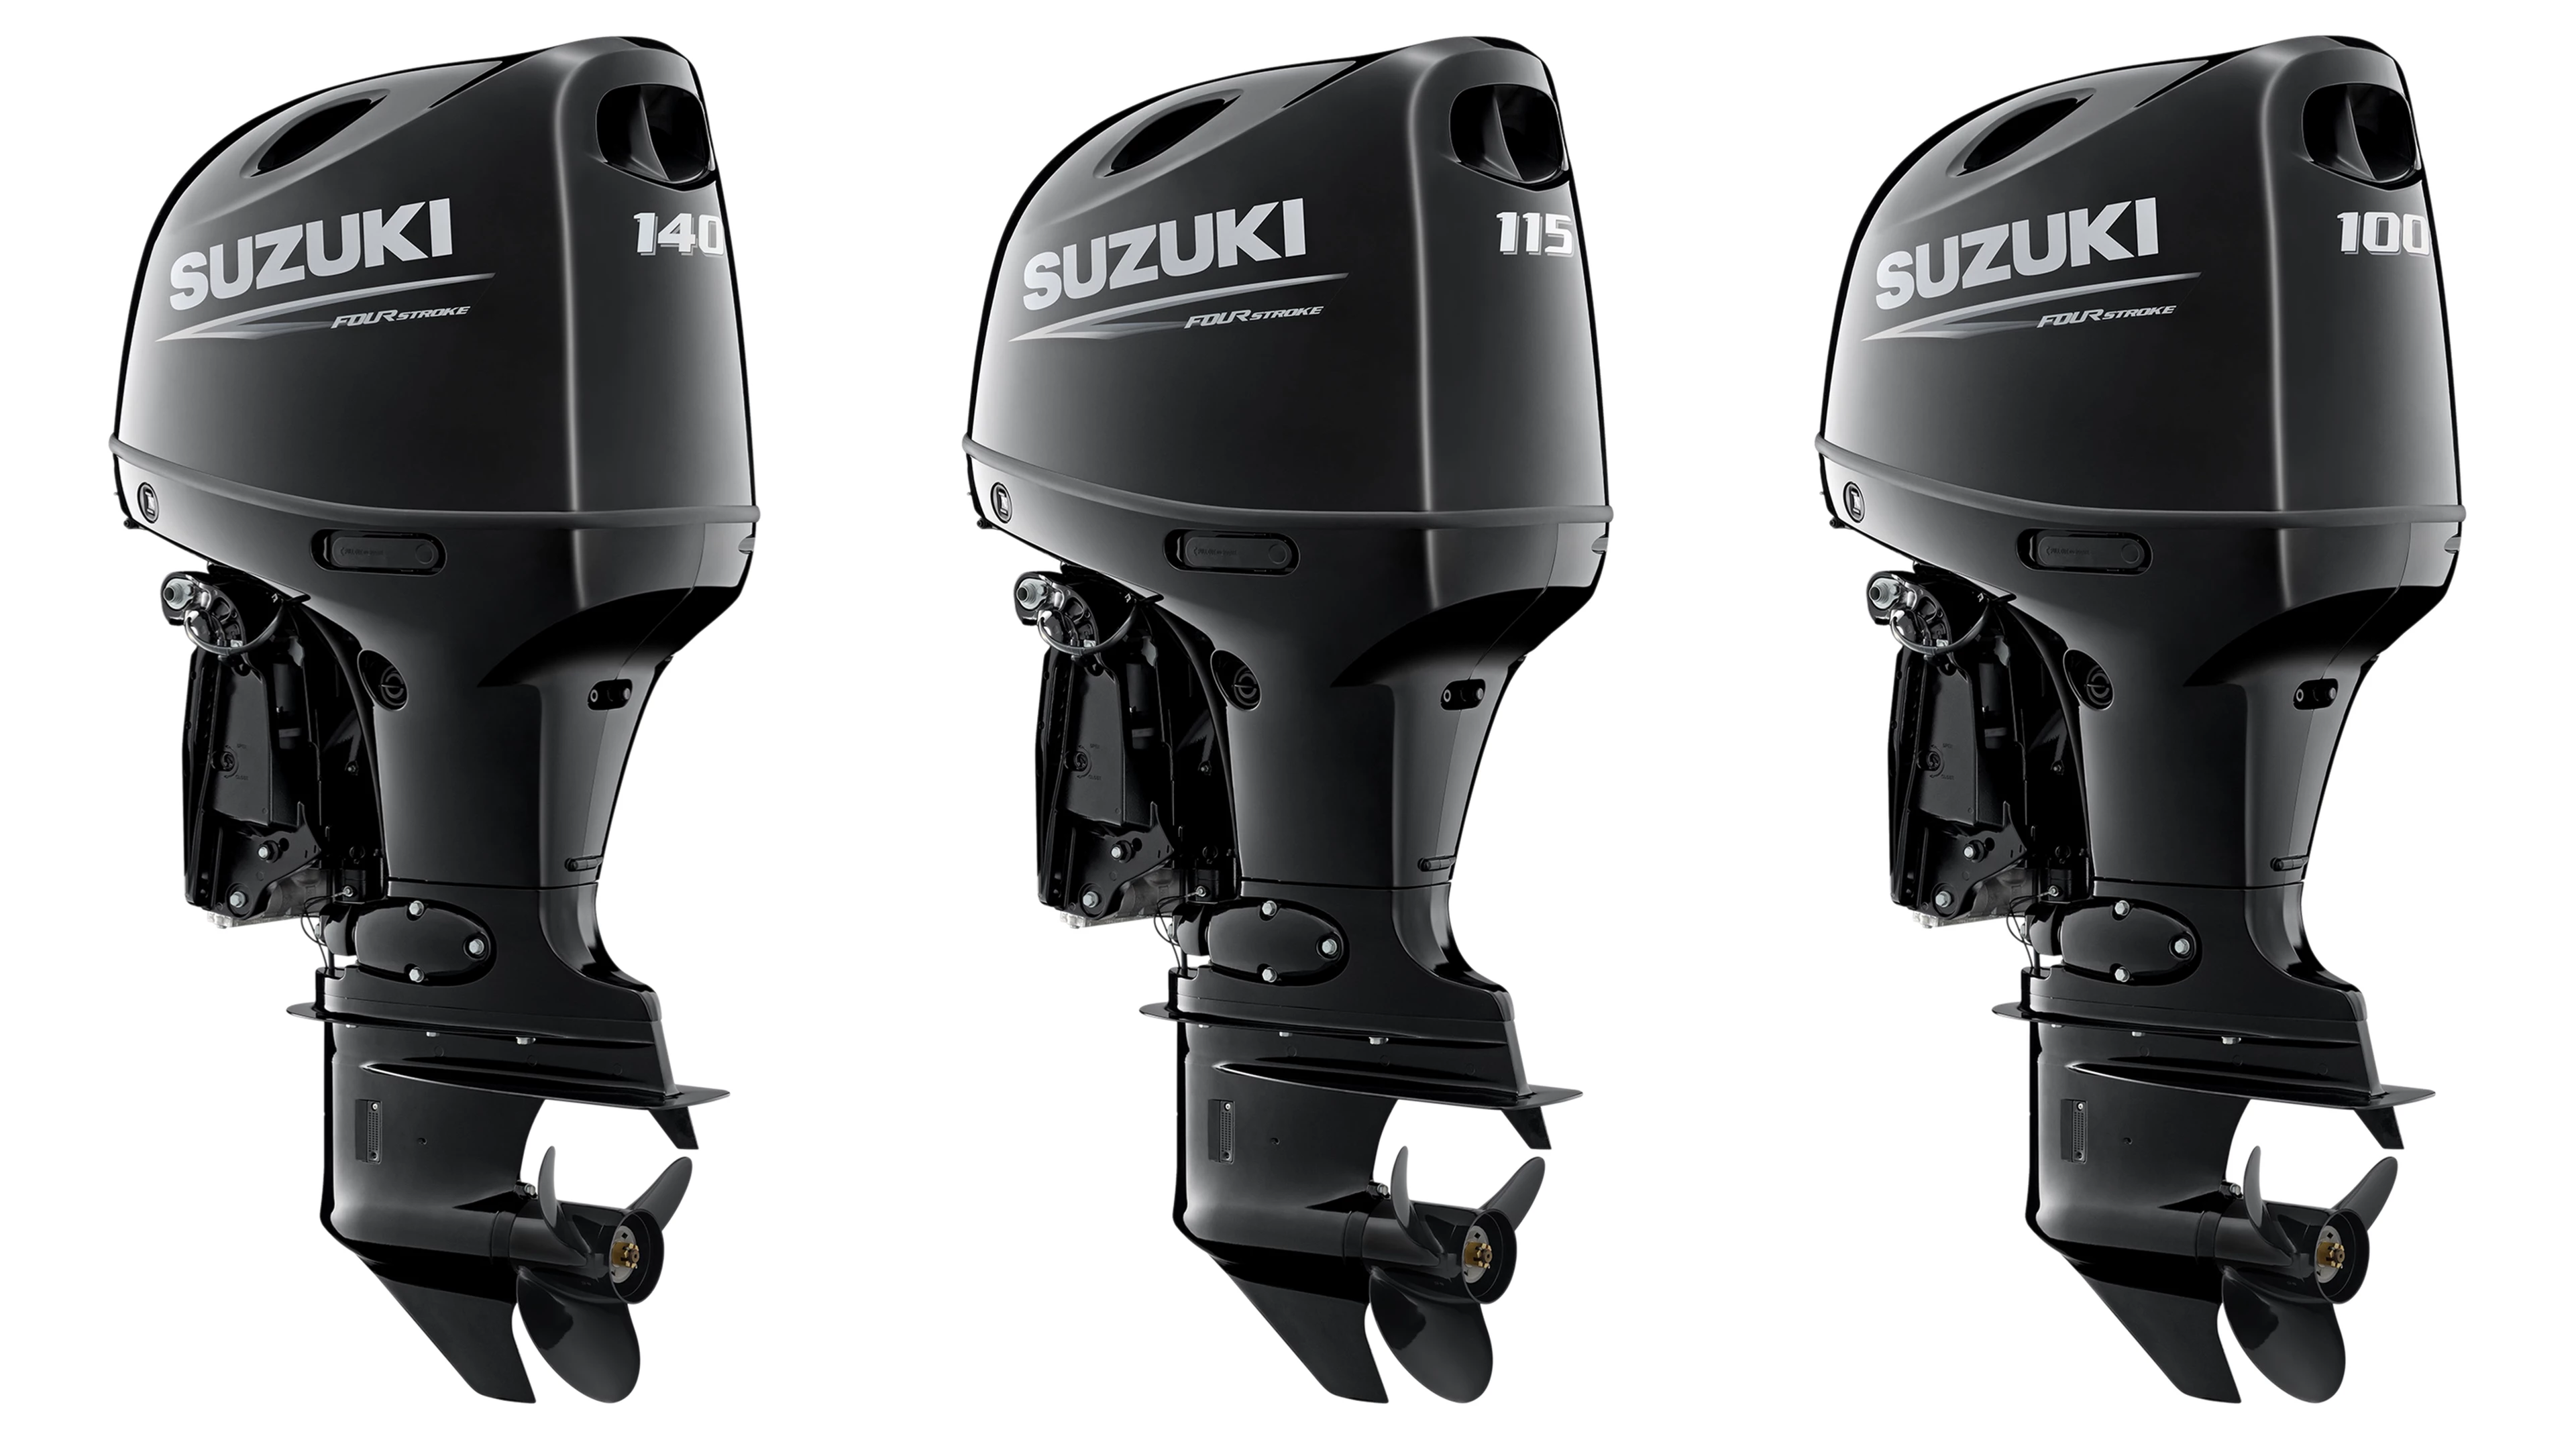 140 115 & 100 outboards